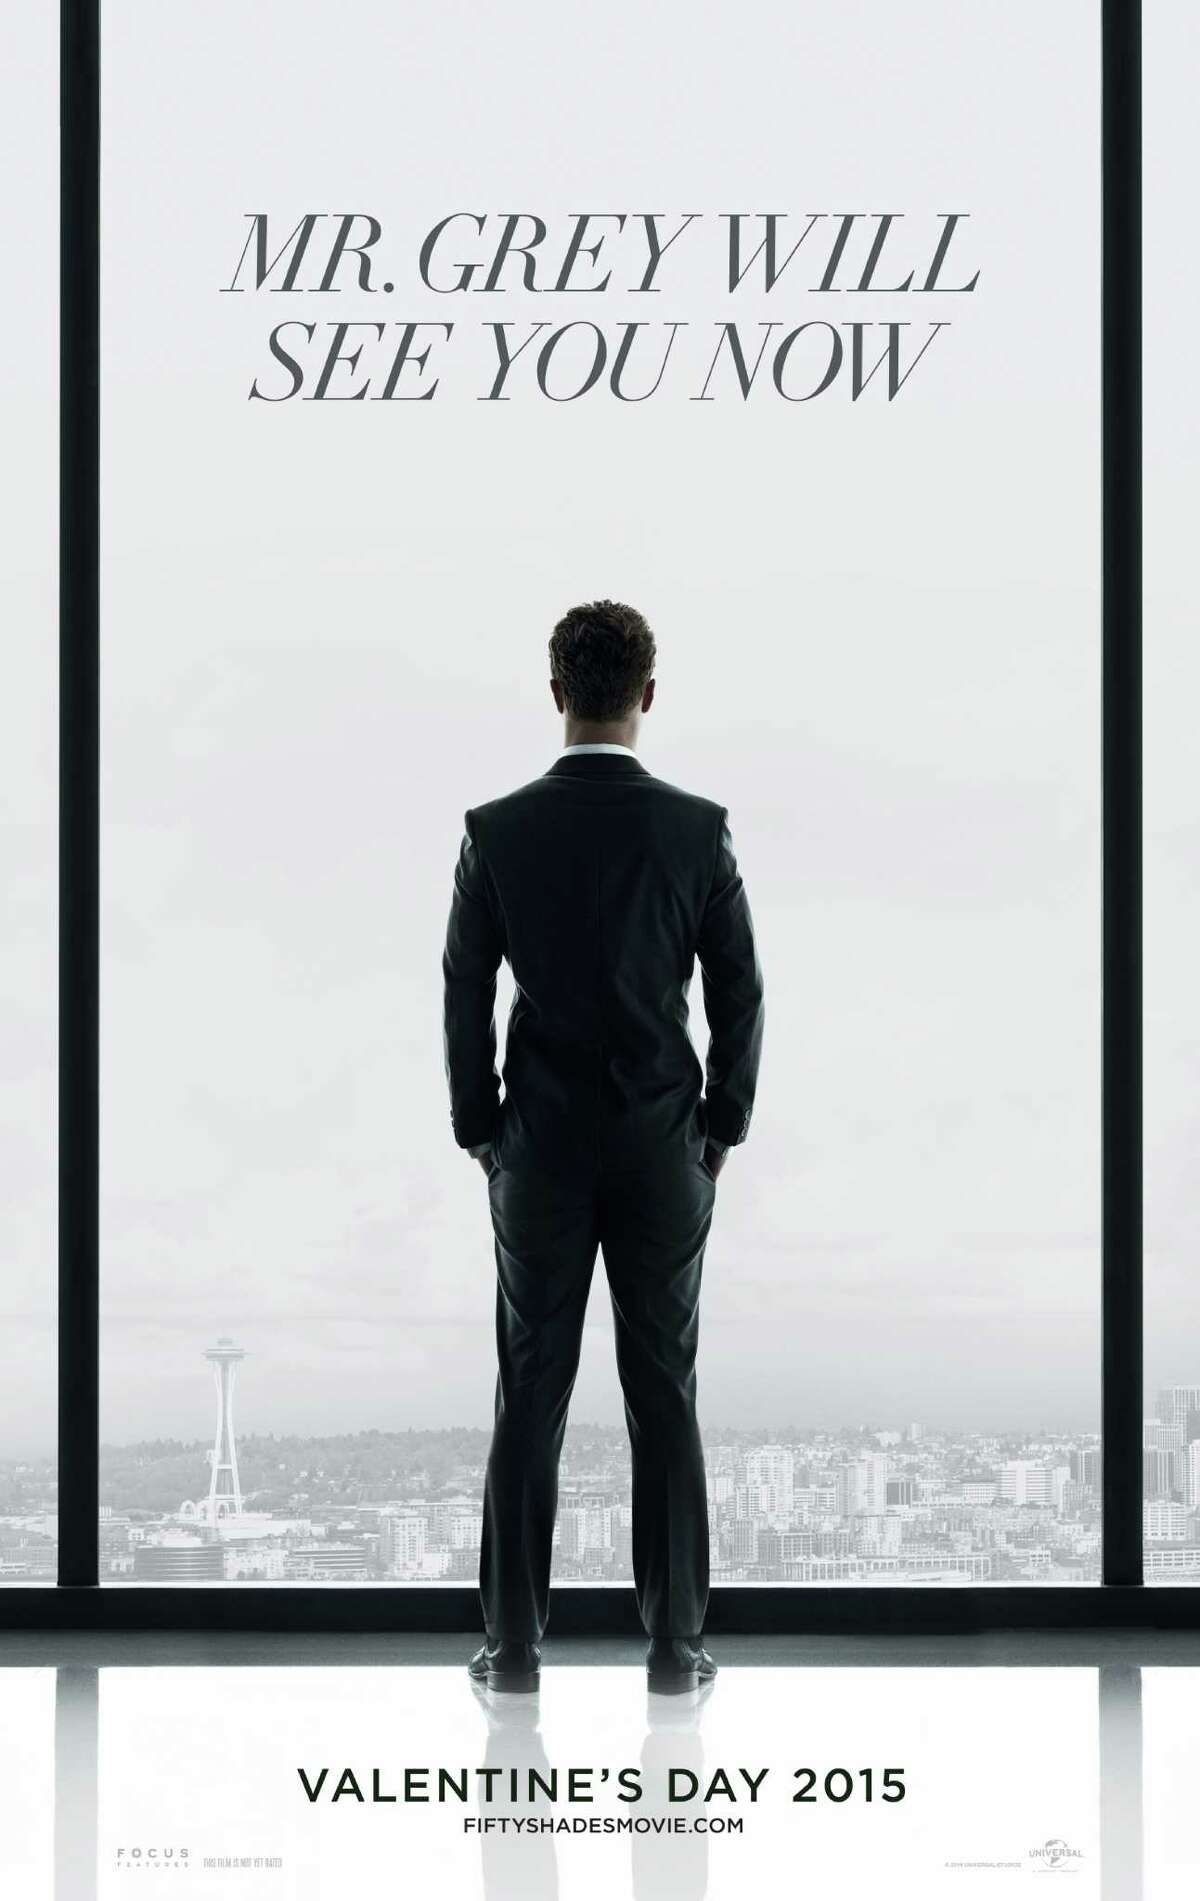 “Fifty Shades of Grey”Release date: Feb. 13Starring: Dakota Johnson, Jamie DornanThe only reason this film makes the list is because it’s likely going to be awful. Let the hate-watching begin this February. But the film does look steamy and scandalous.